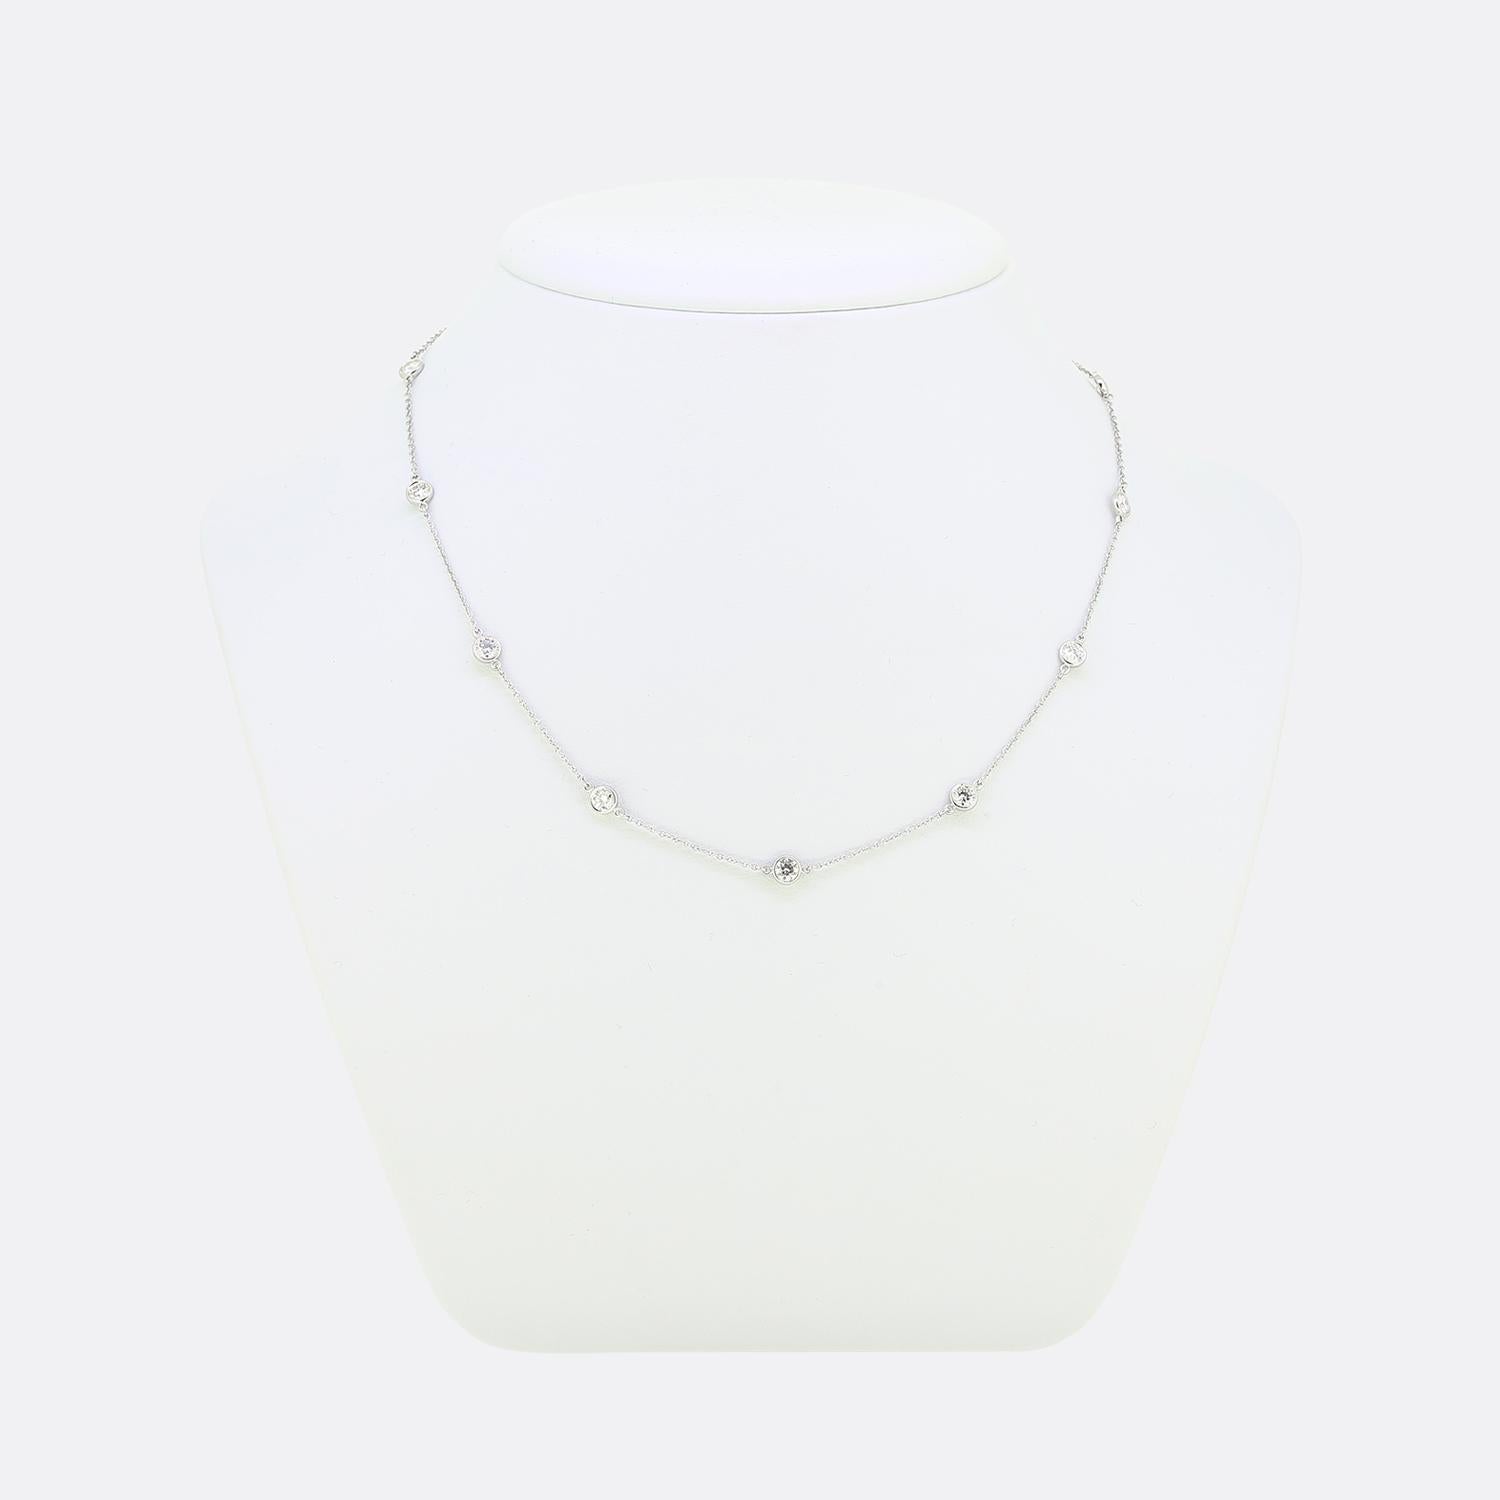 Here we have glorious necklace from the world renowned jewellery designer, Tiffany & Co. A slim platinum belcher chain plays host to 11 evenly spread, individually rub-over set round brilliant cut diamonds.

This is one of Elsa Peretti's original